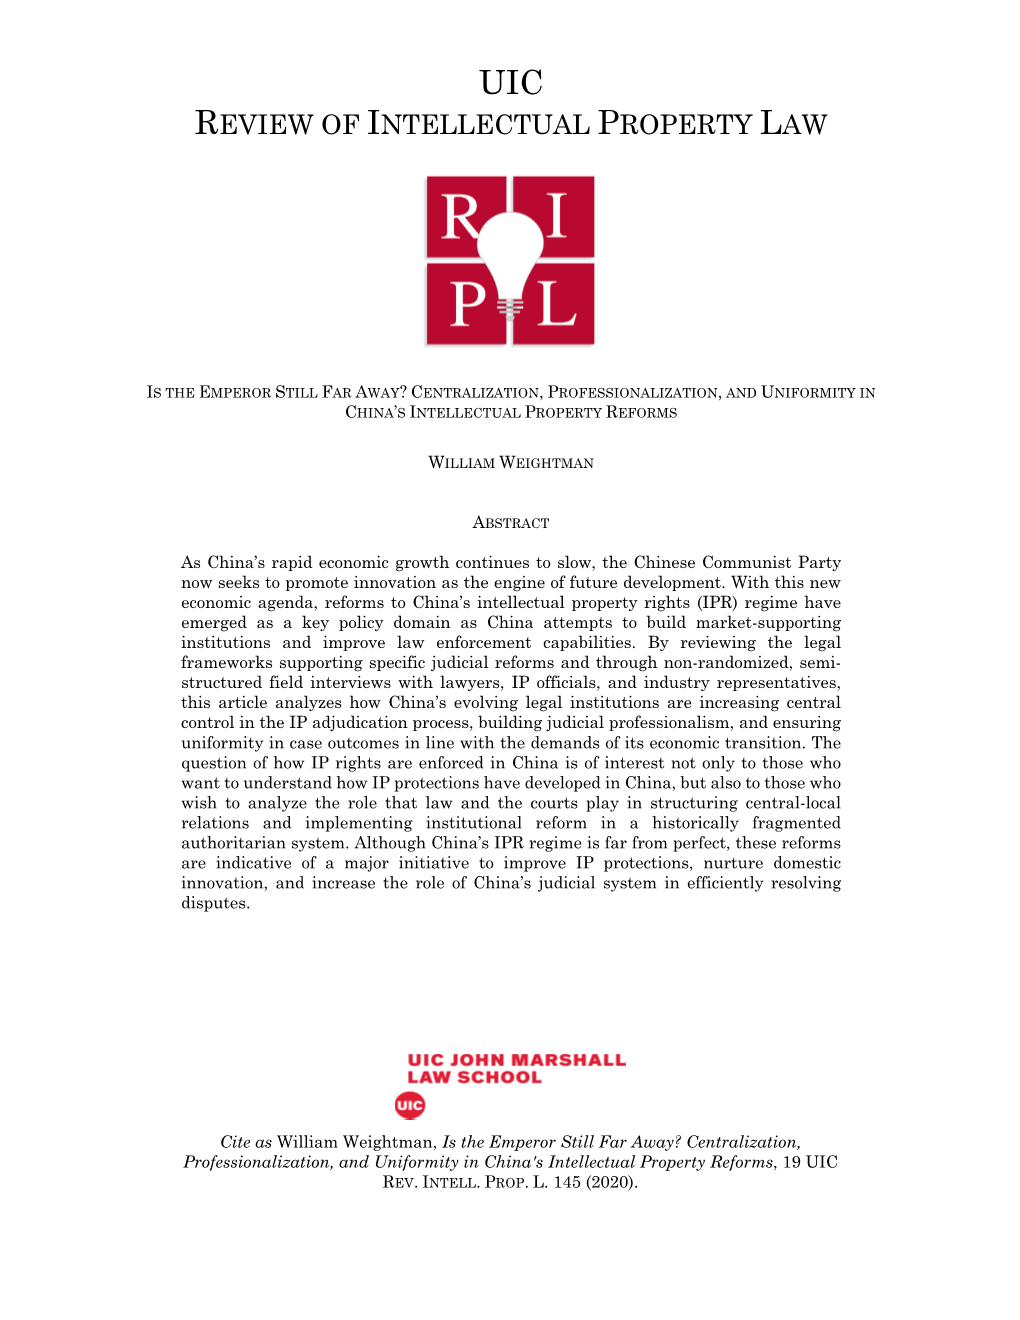 Centralization, Professionalization, and Uniformity in China's Intellectual Property Reforms, 19 UIC REV